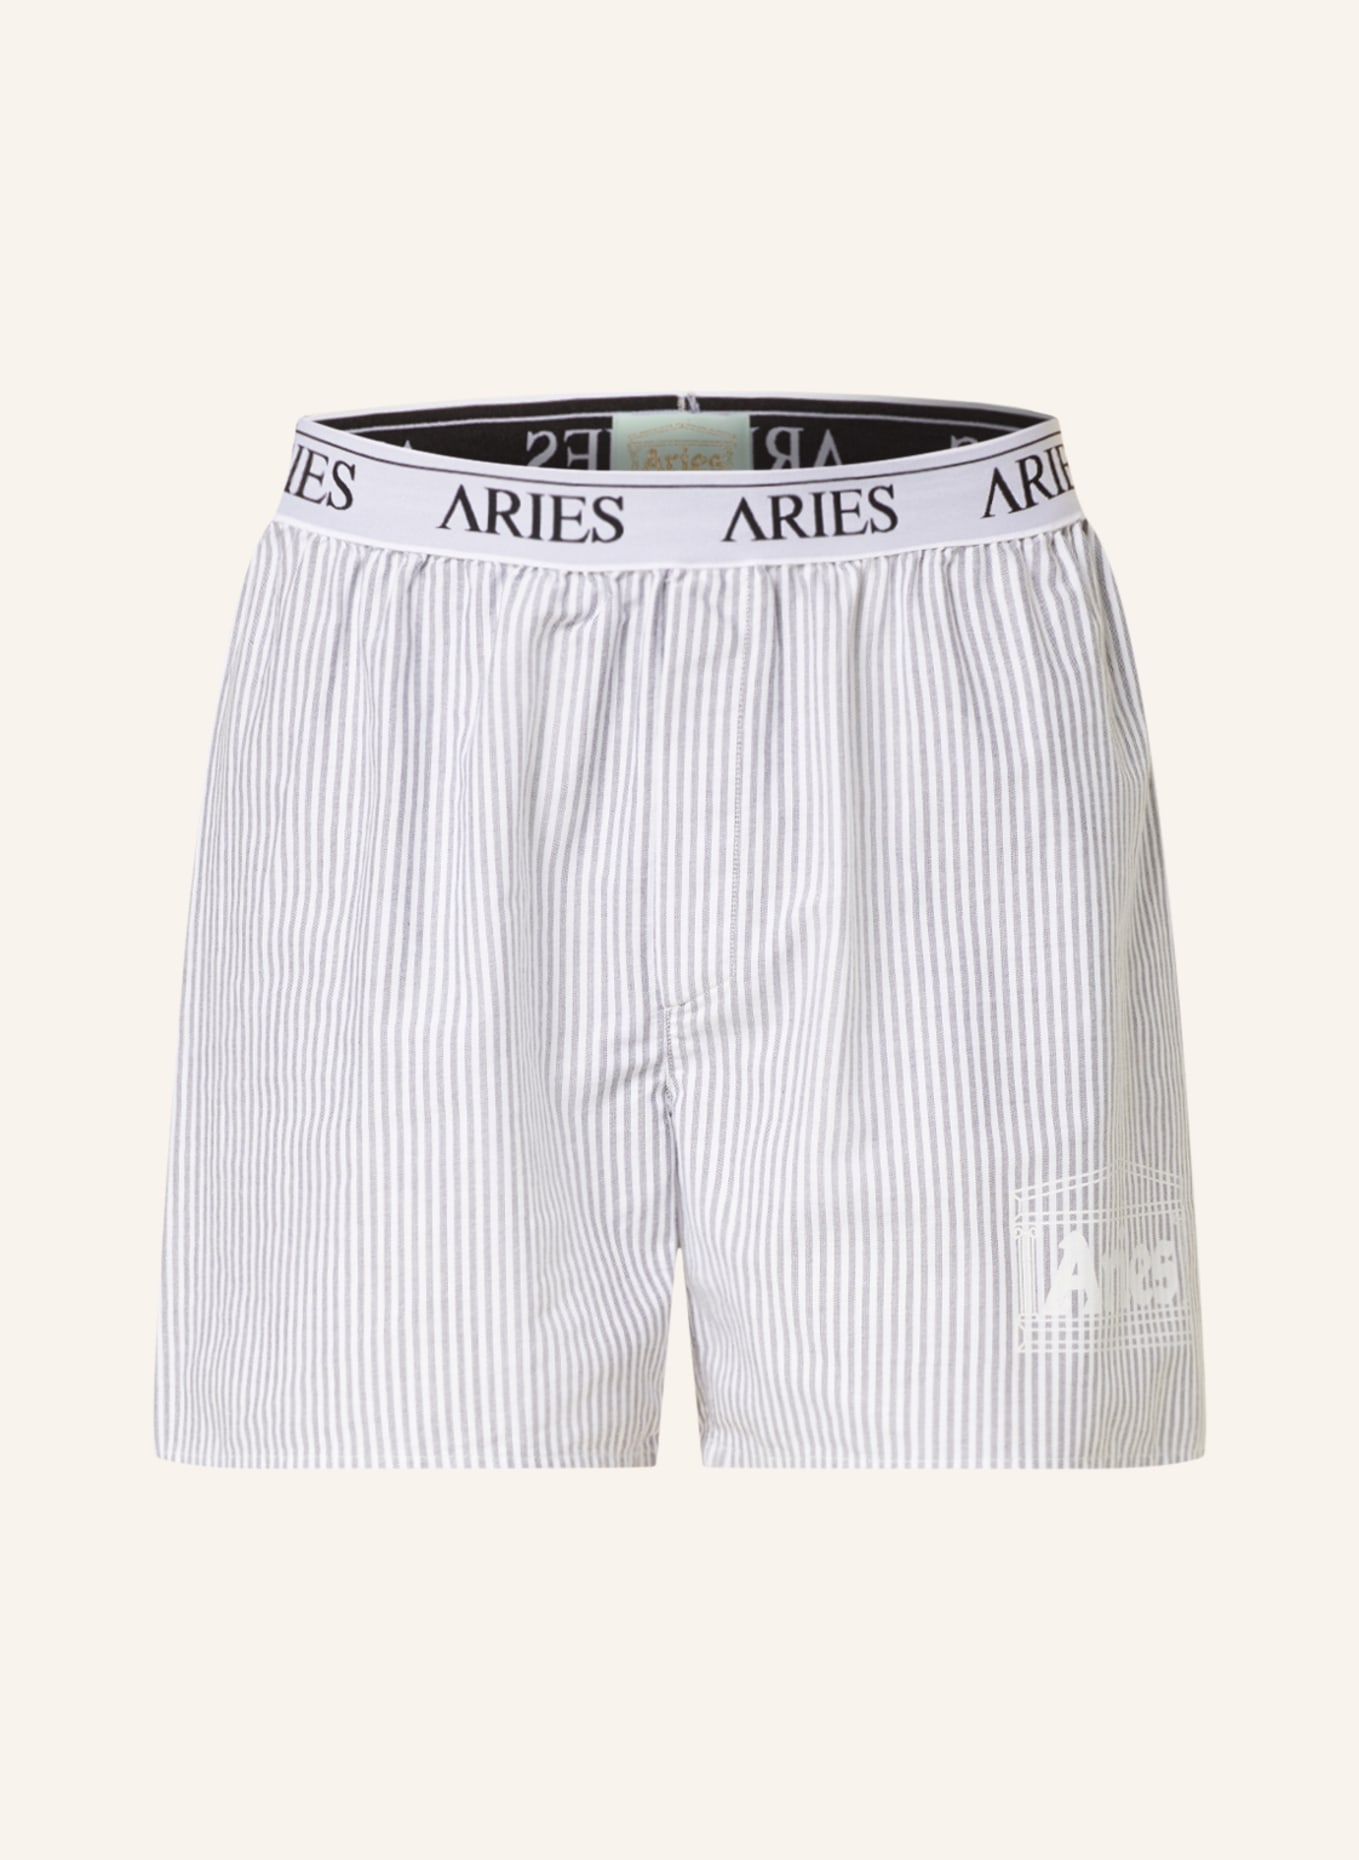 Aries Arise Woven boxer shorts, Color: BLUE GRAY/ WHITE (Image 1)